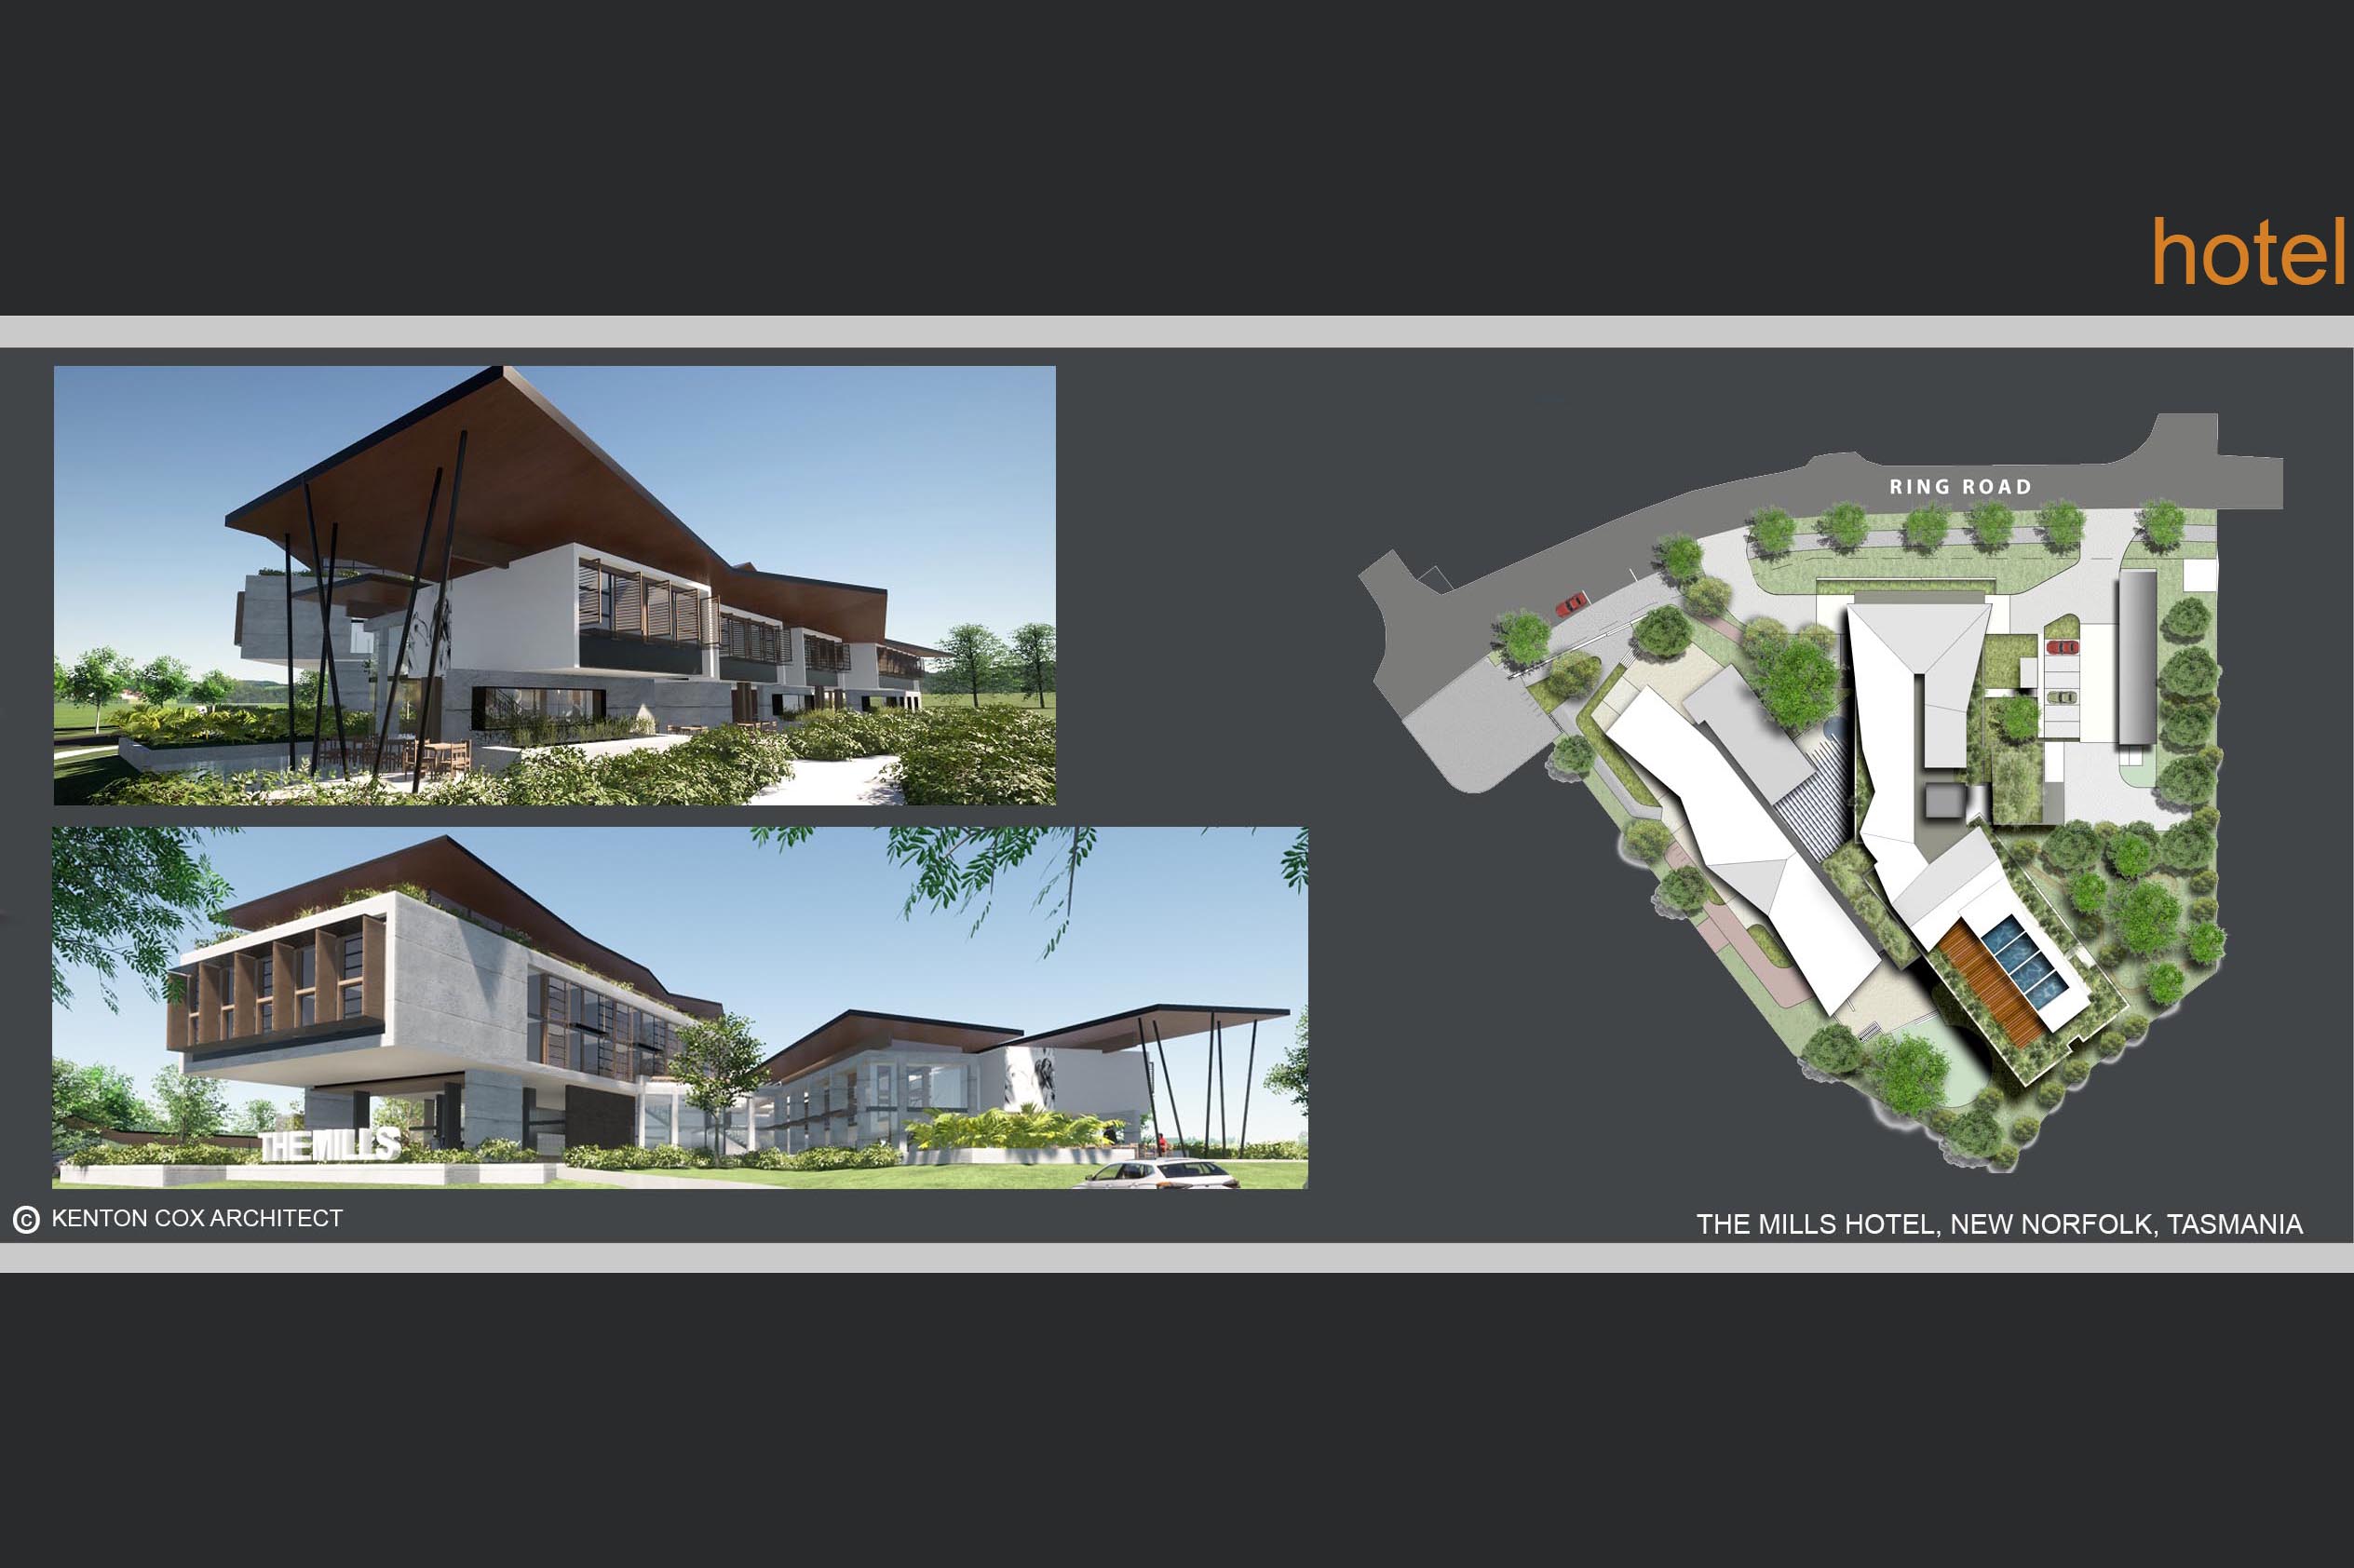 Proposed new Hotel at The Mills New Norfolk, Tasmania